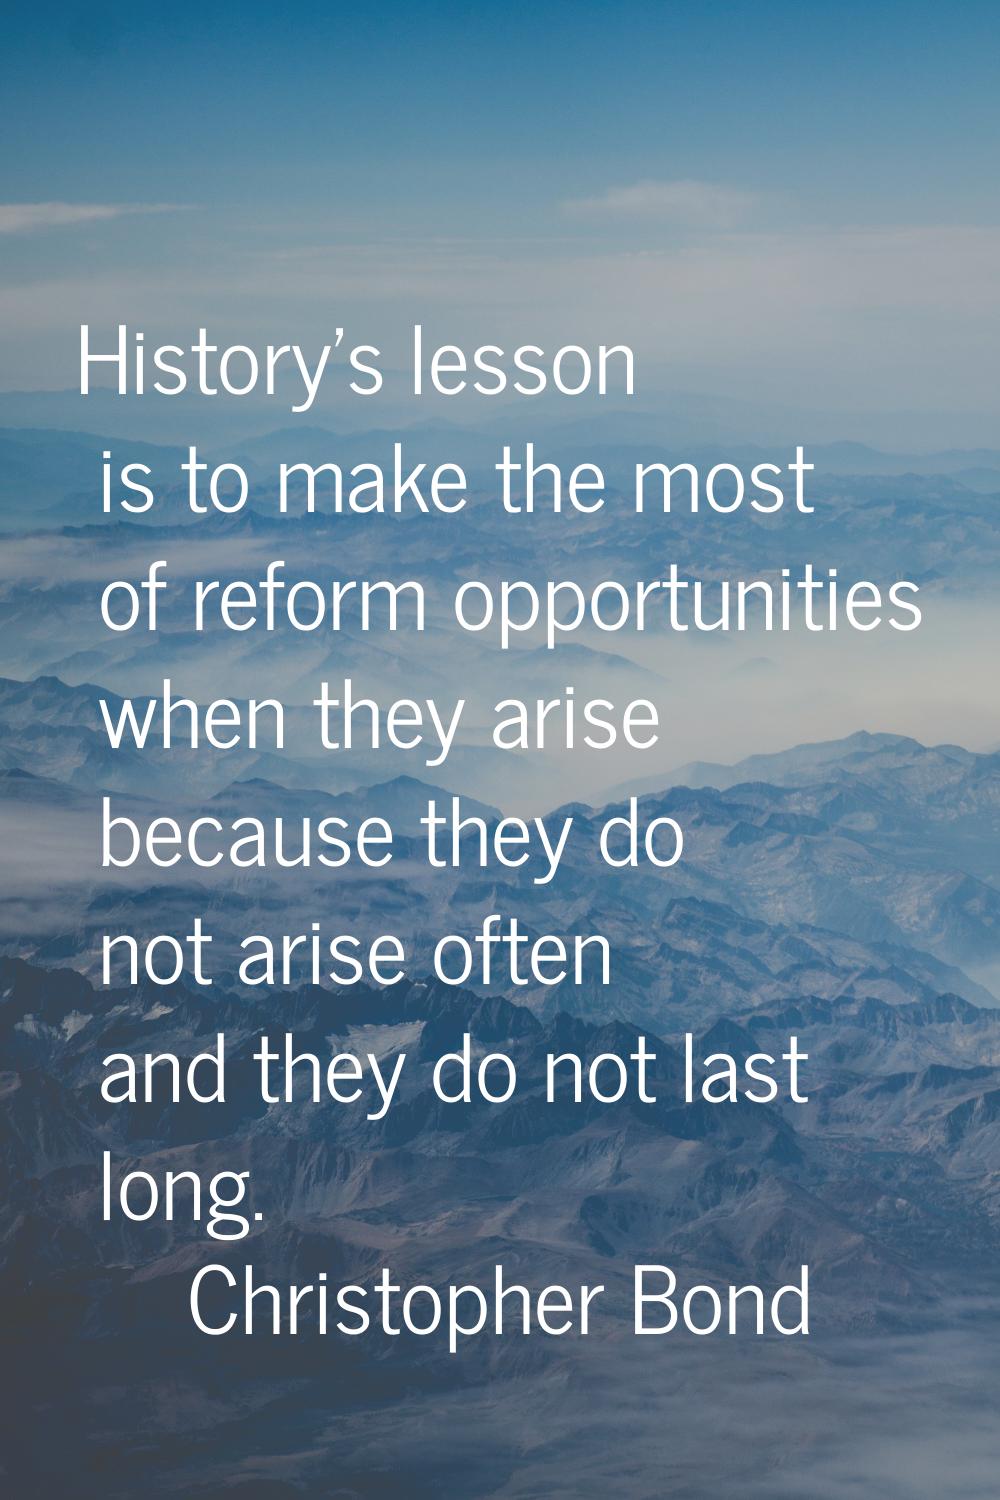 History's lesson is to make the most of reform opportunities when they arise because they do not ar